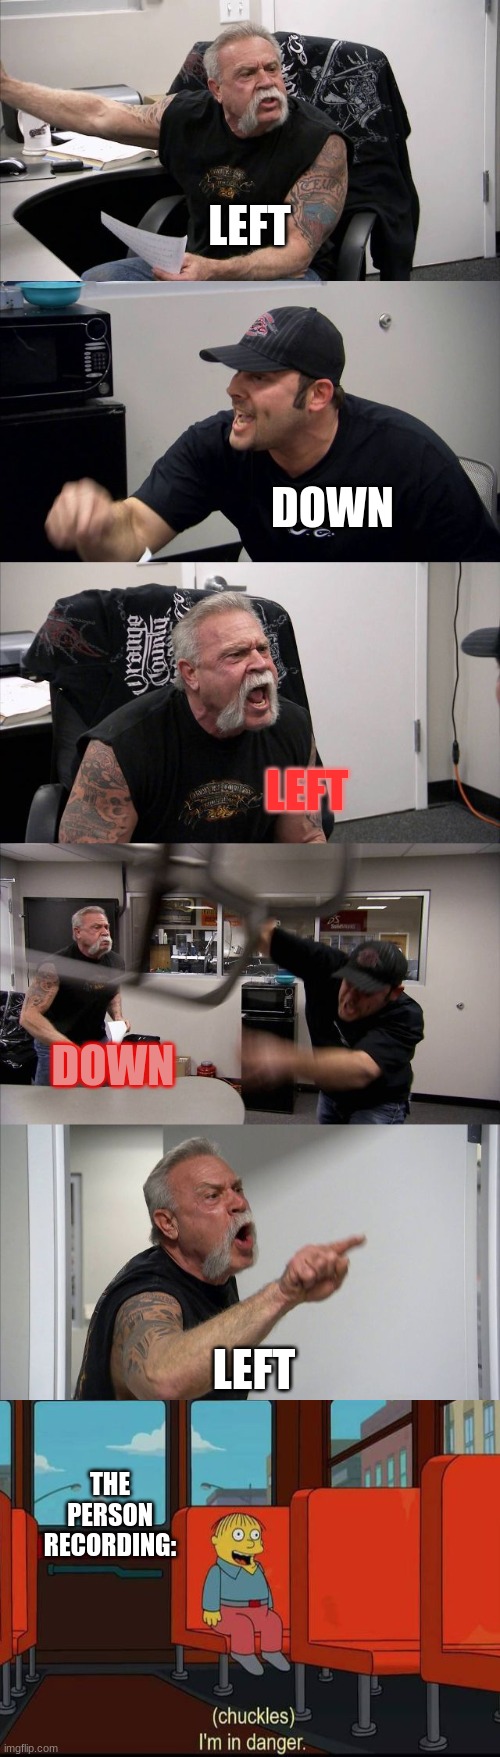 American Chopper Argument | LEFT; DOWN; LEFT; DOWN; LEFT; THE PERSON RECORDING: | image tagged in memes,american chopper argument,chuckles im in danger,lol | made w/ Imgflip meme maker